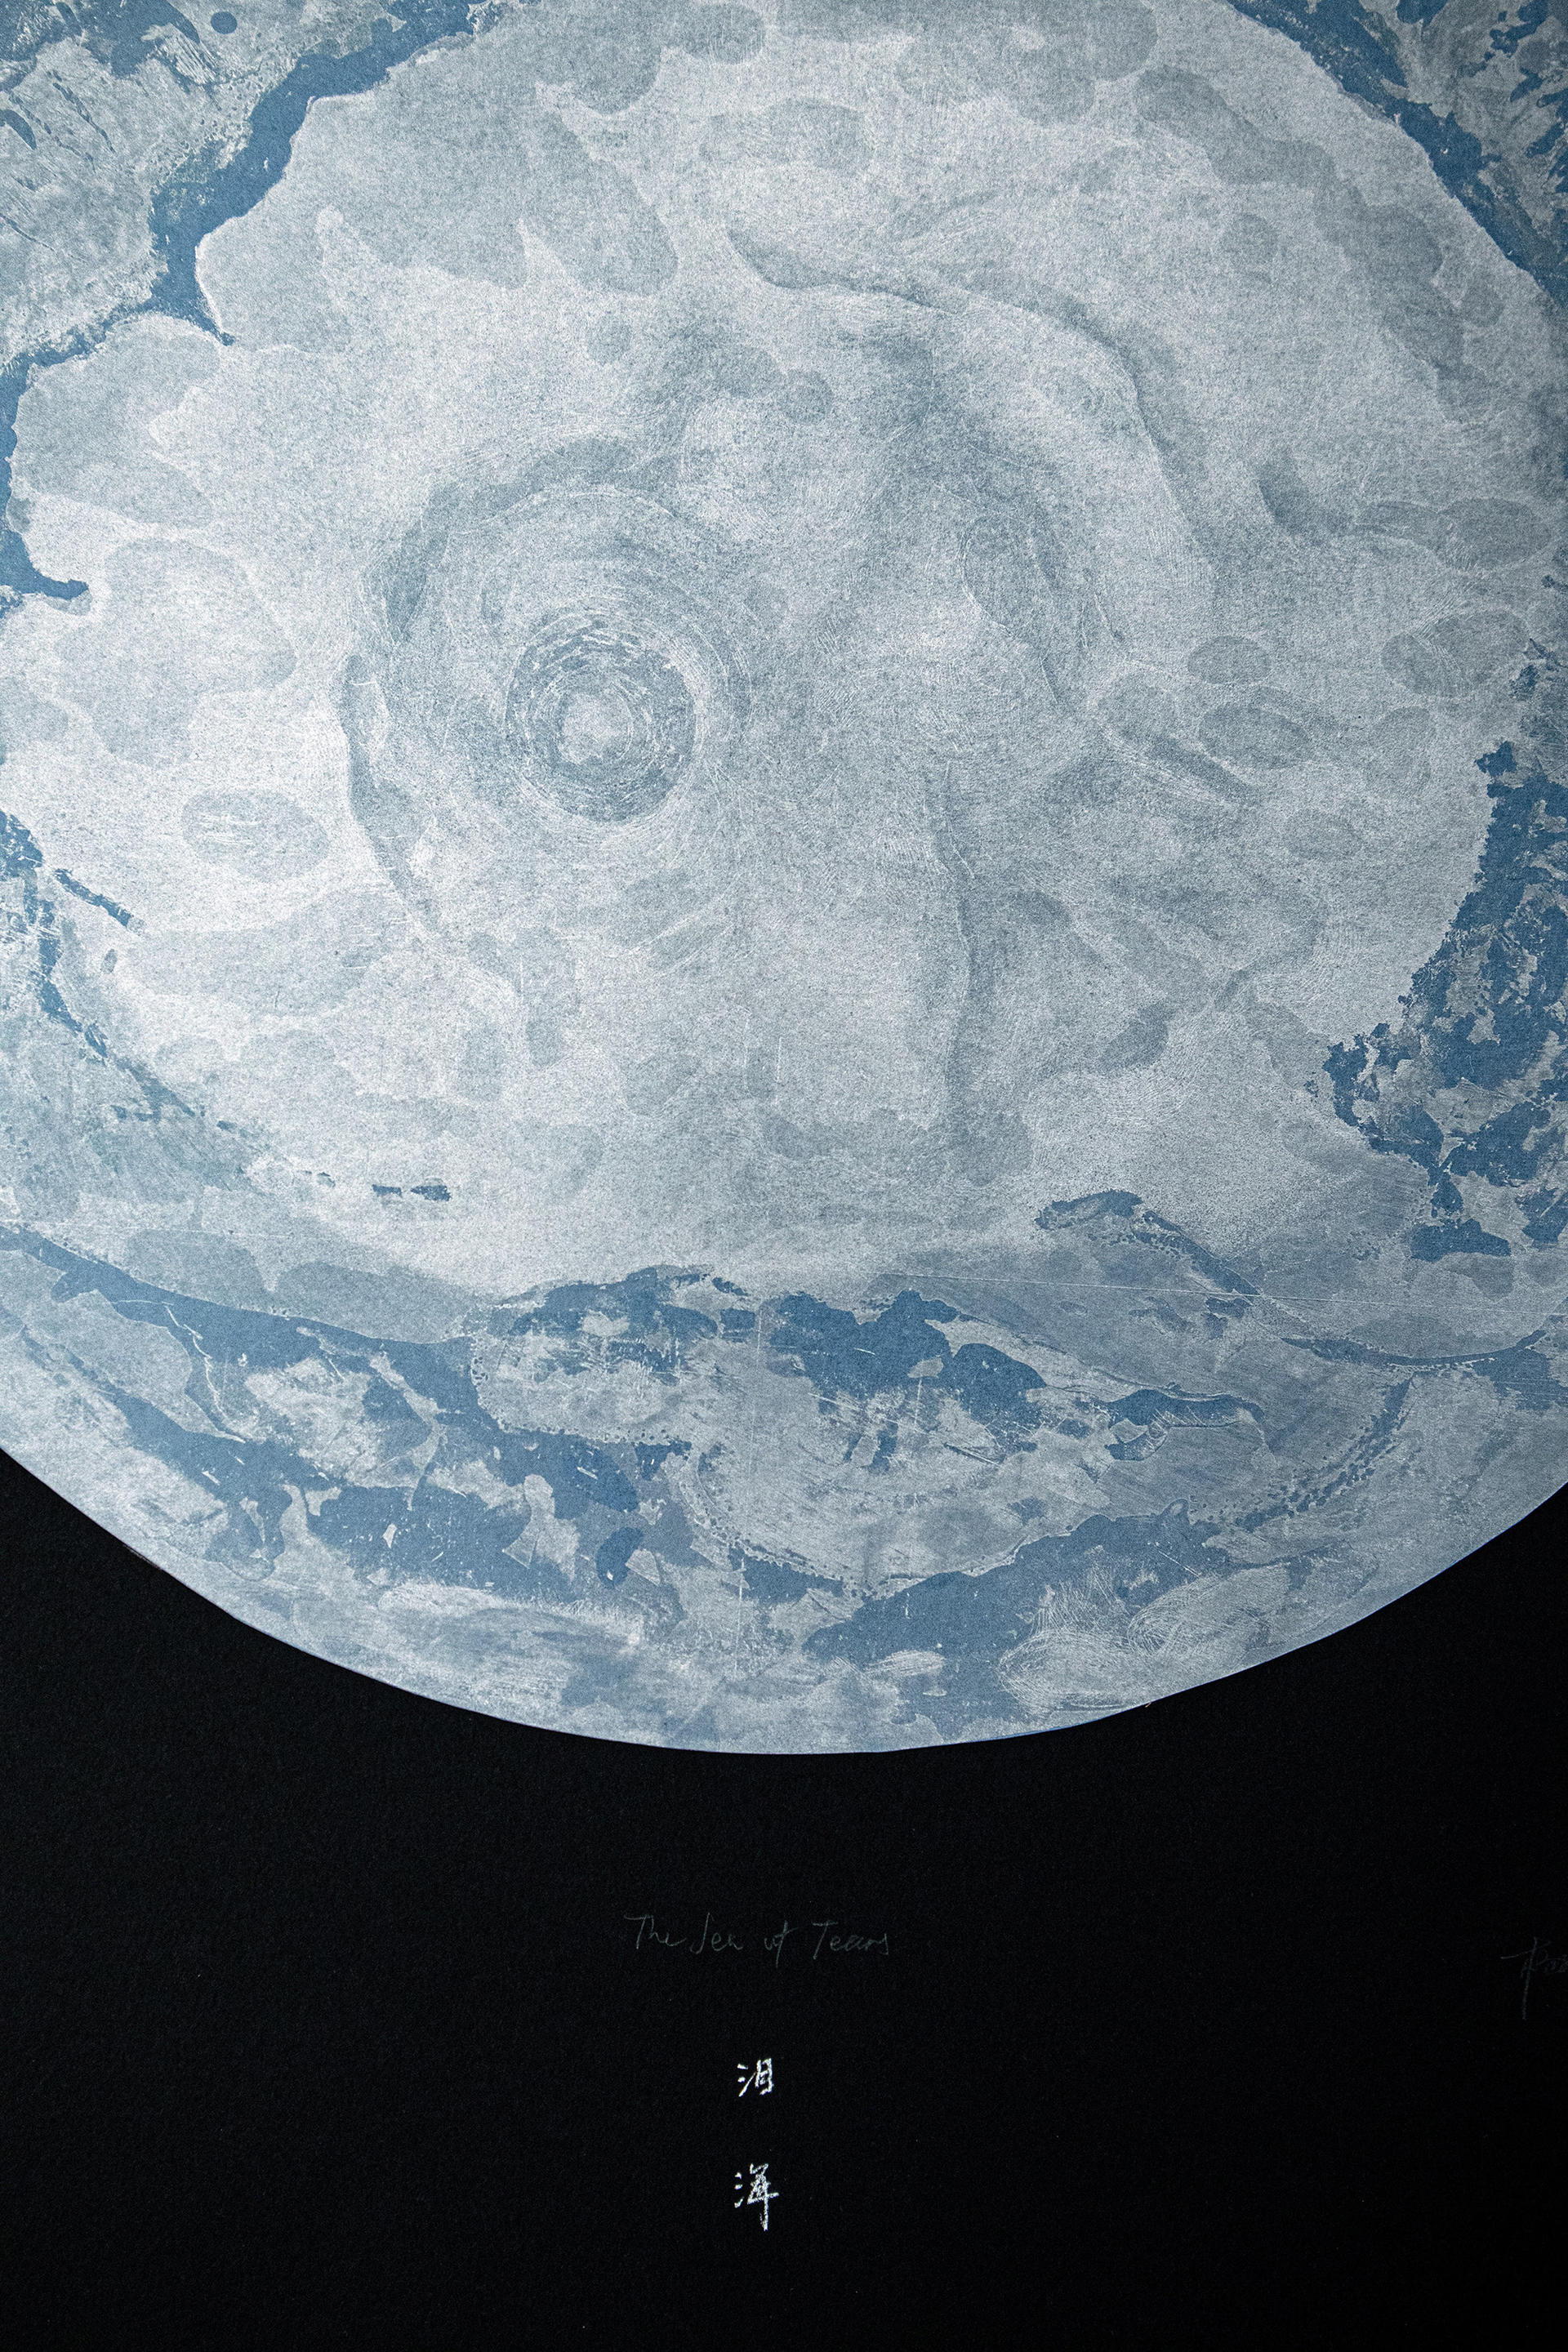 The detail of the light blue moon, you can see the ground structure that looks like a curled up embryo shape.